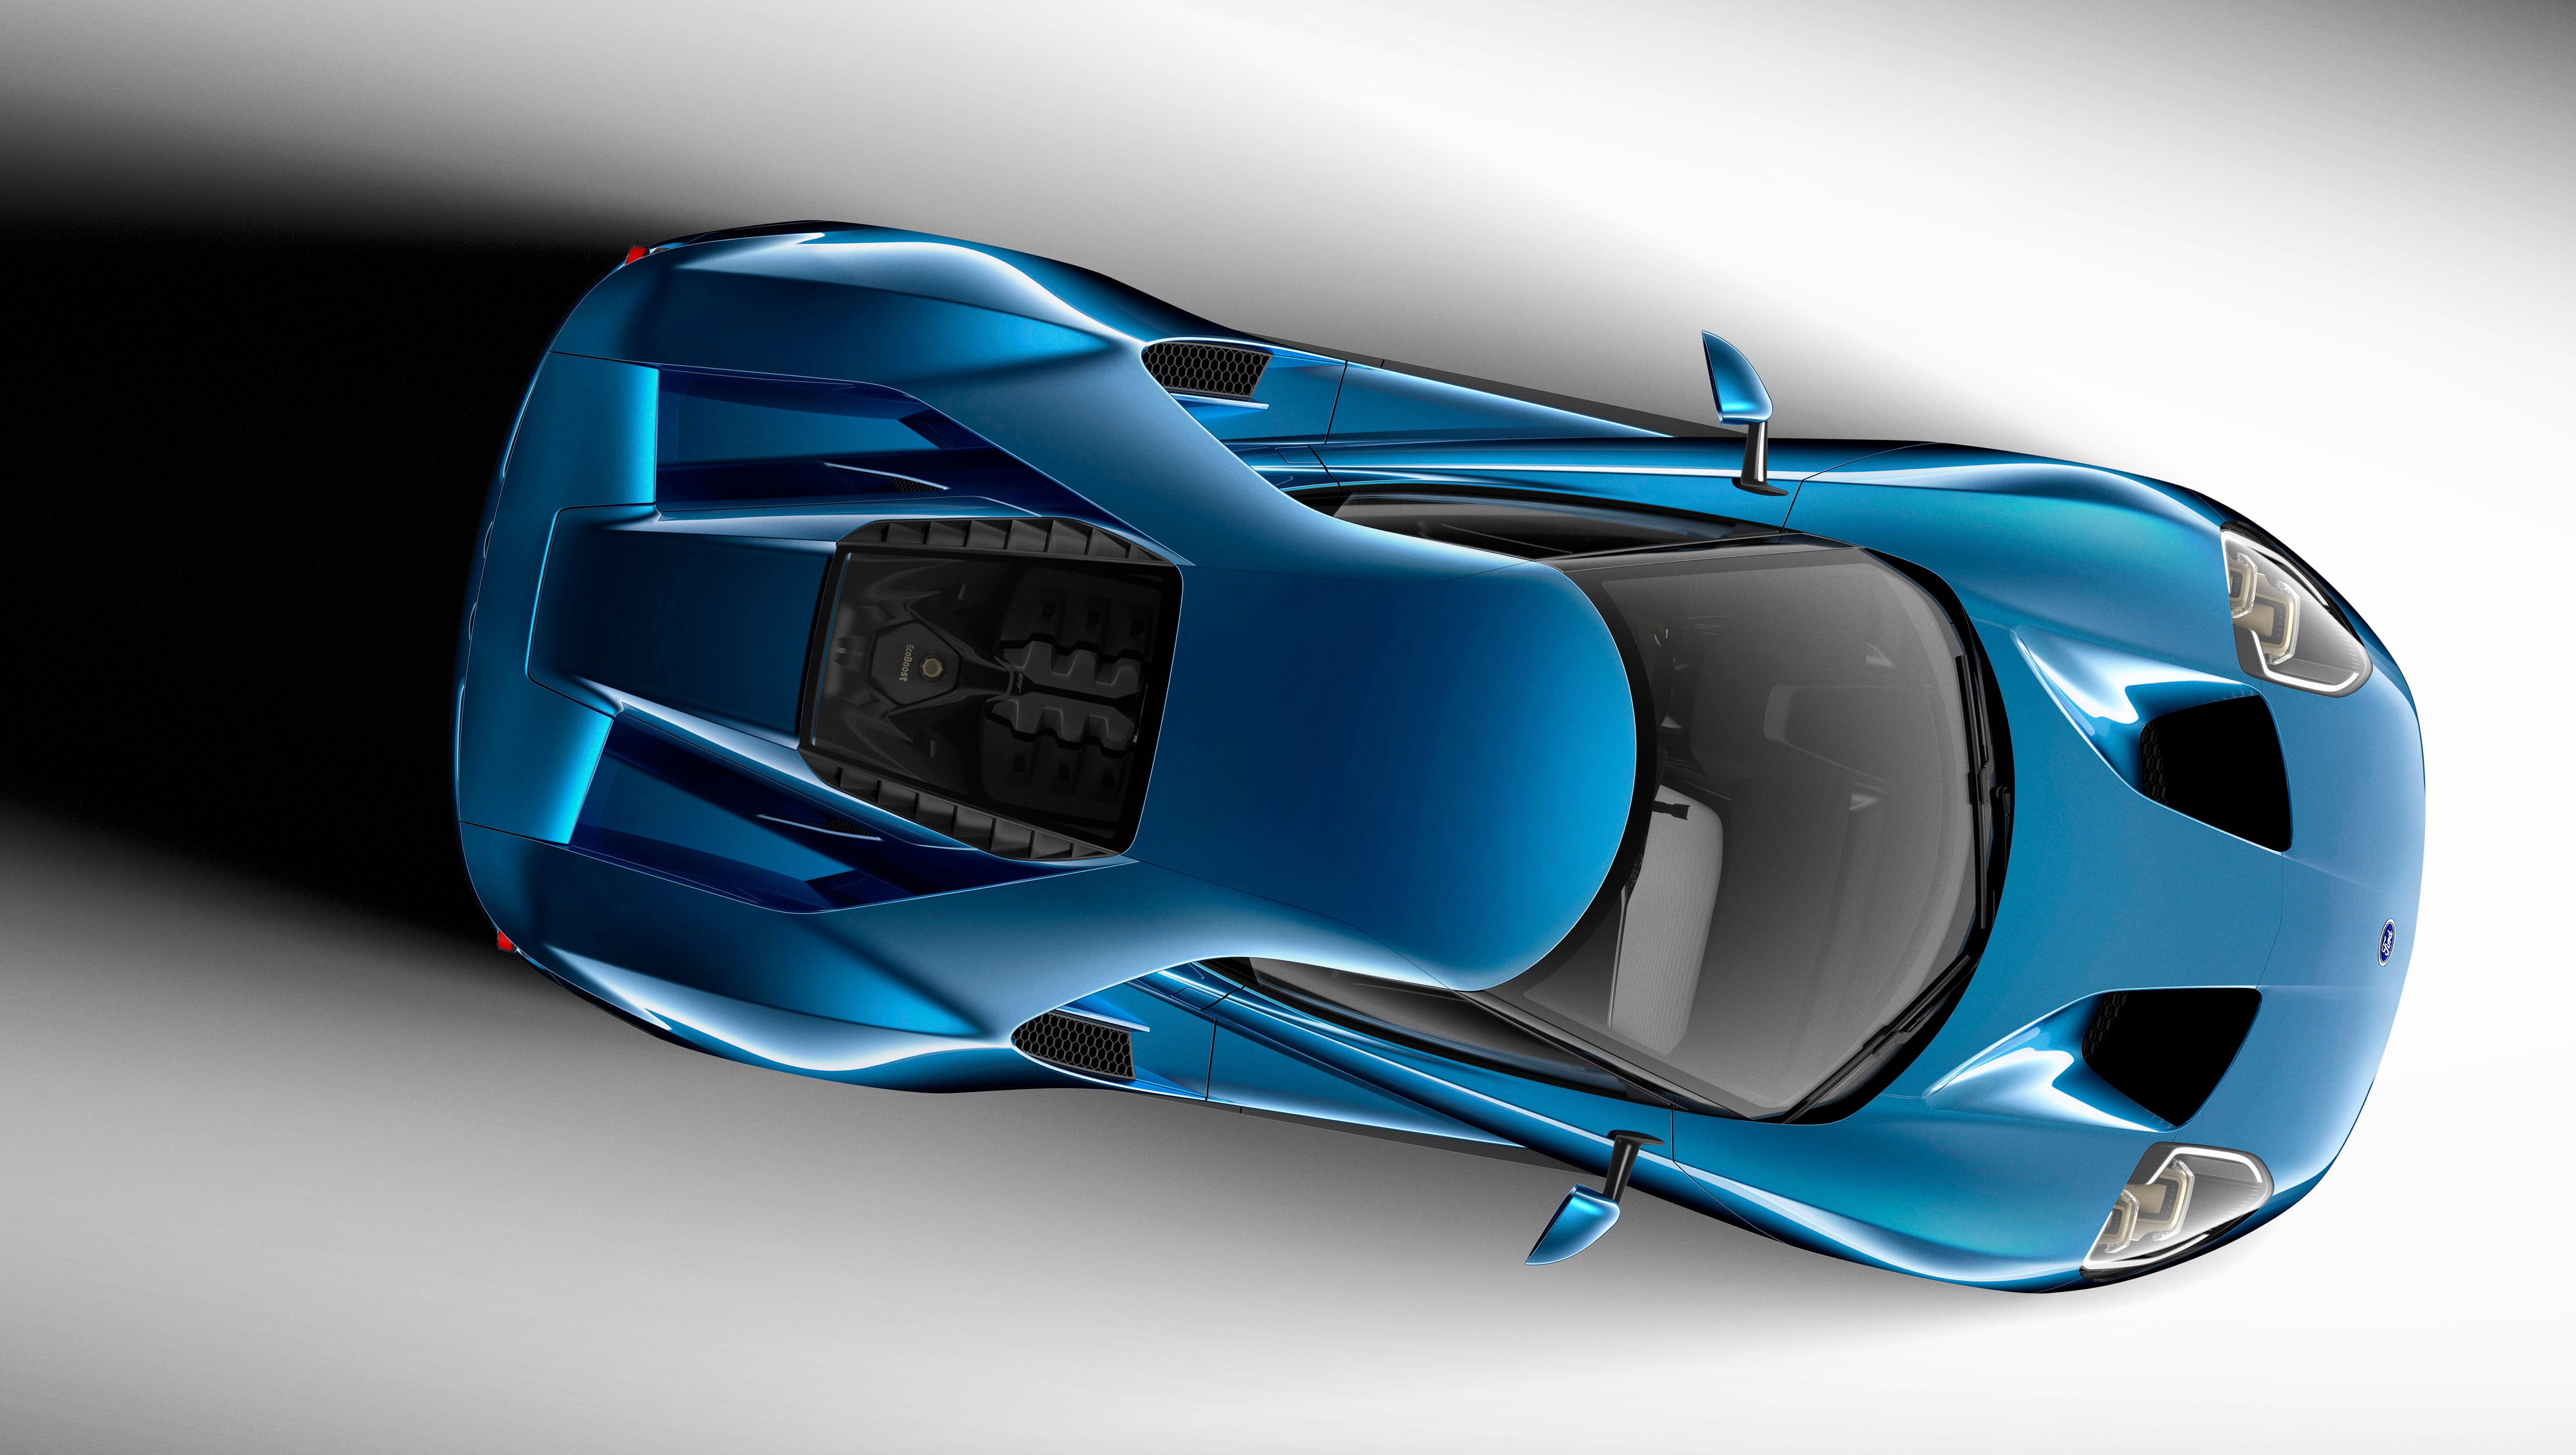 On the Ford GT supercar, every slope and shape is designed to minimize drag and optimize downforce, and each surface on the GT is functionally crafted to manage airflow.